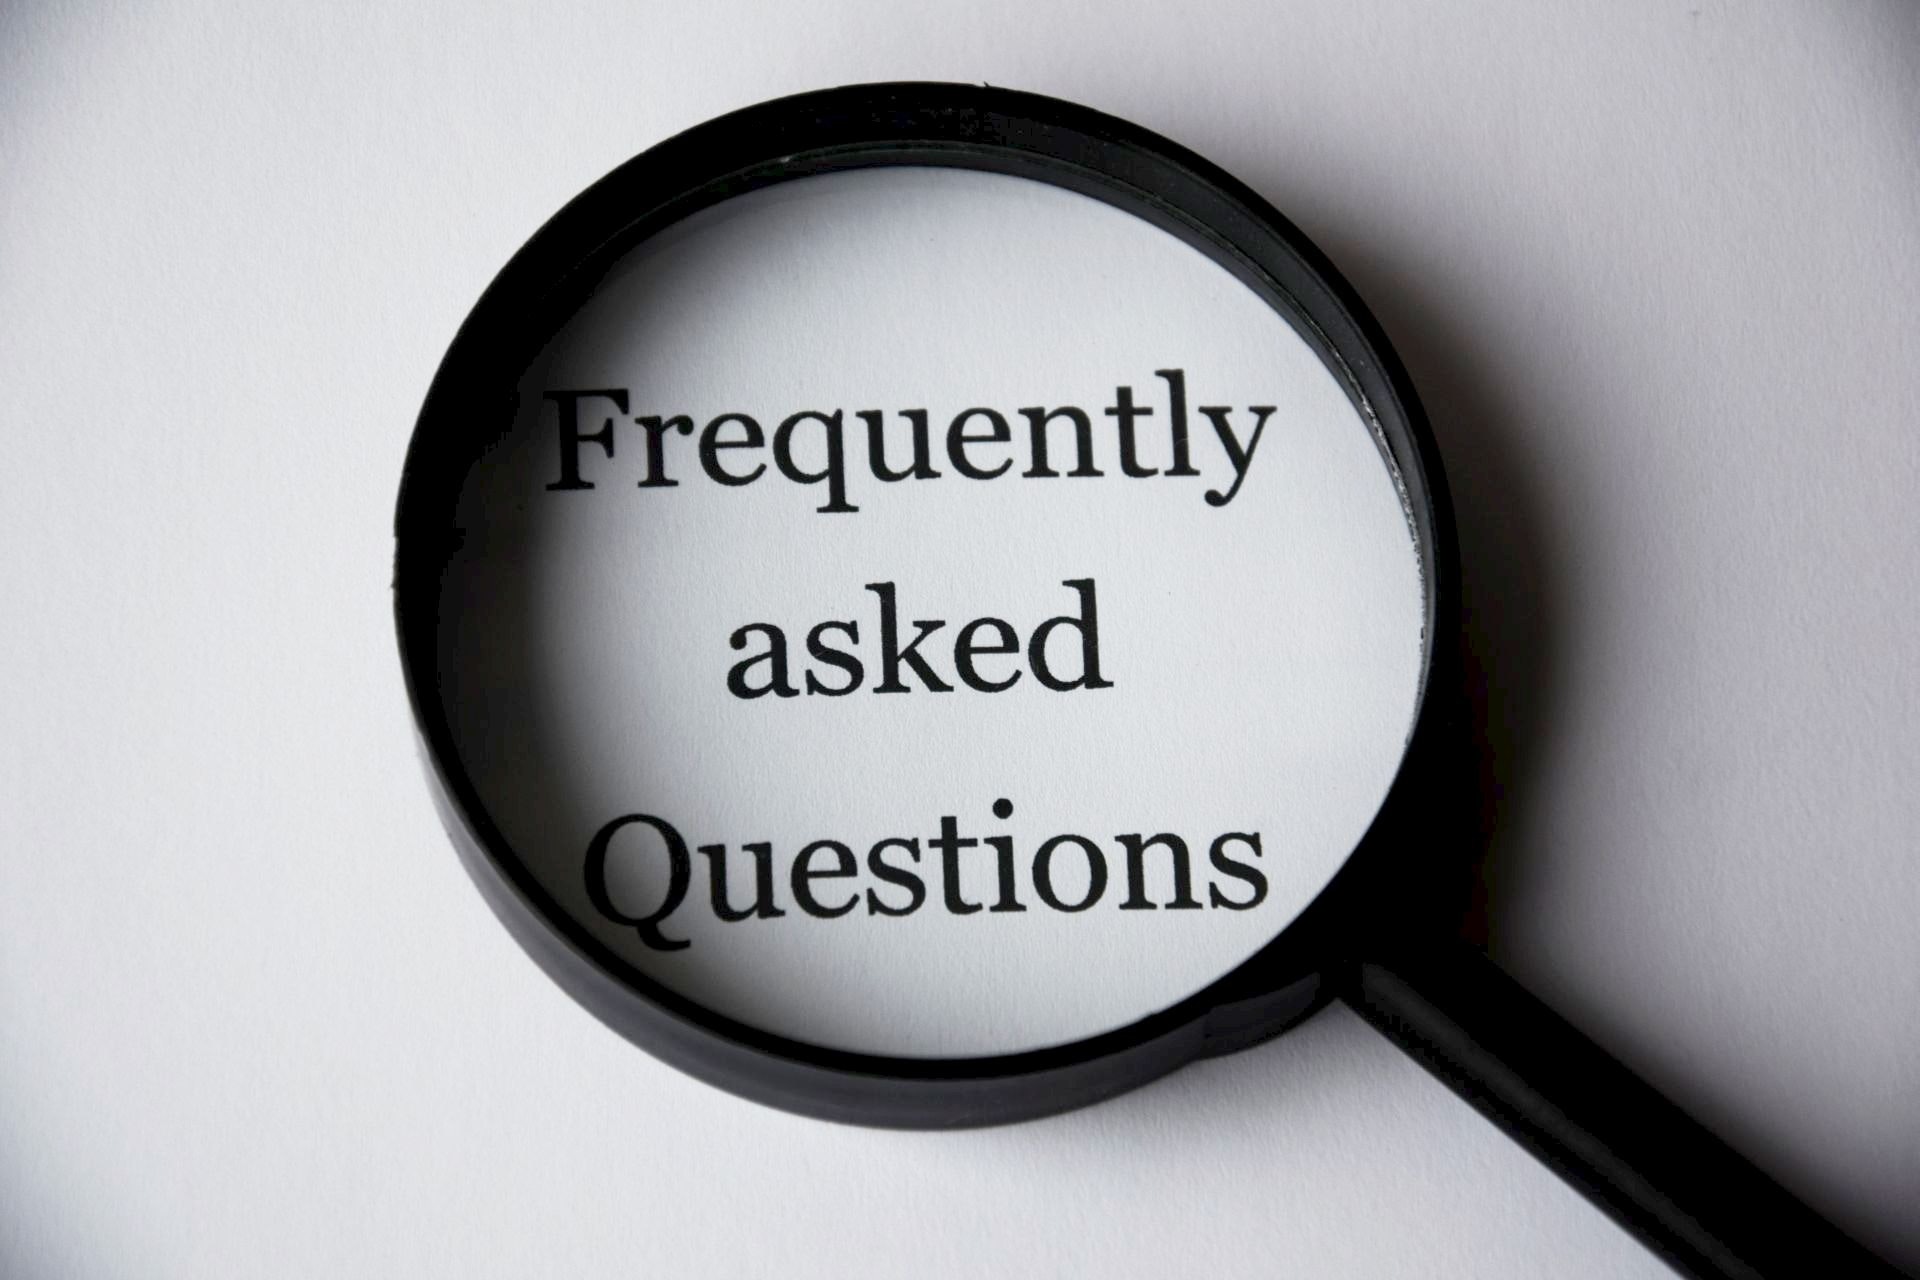 answers frequently asked questions